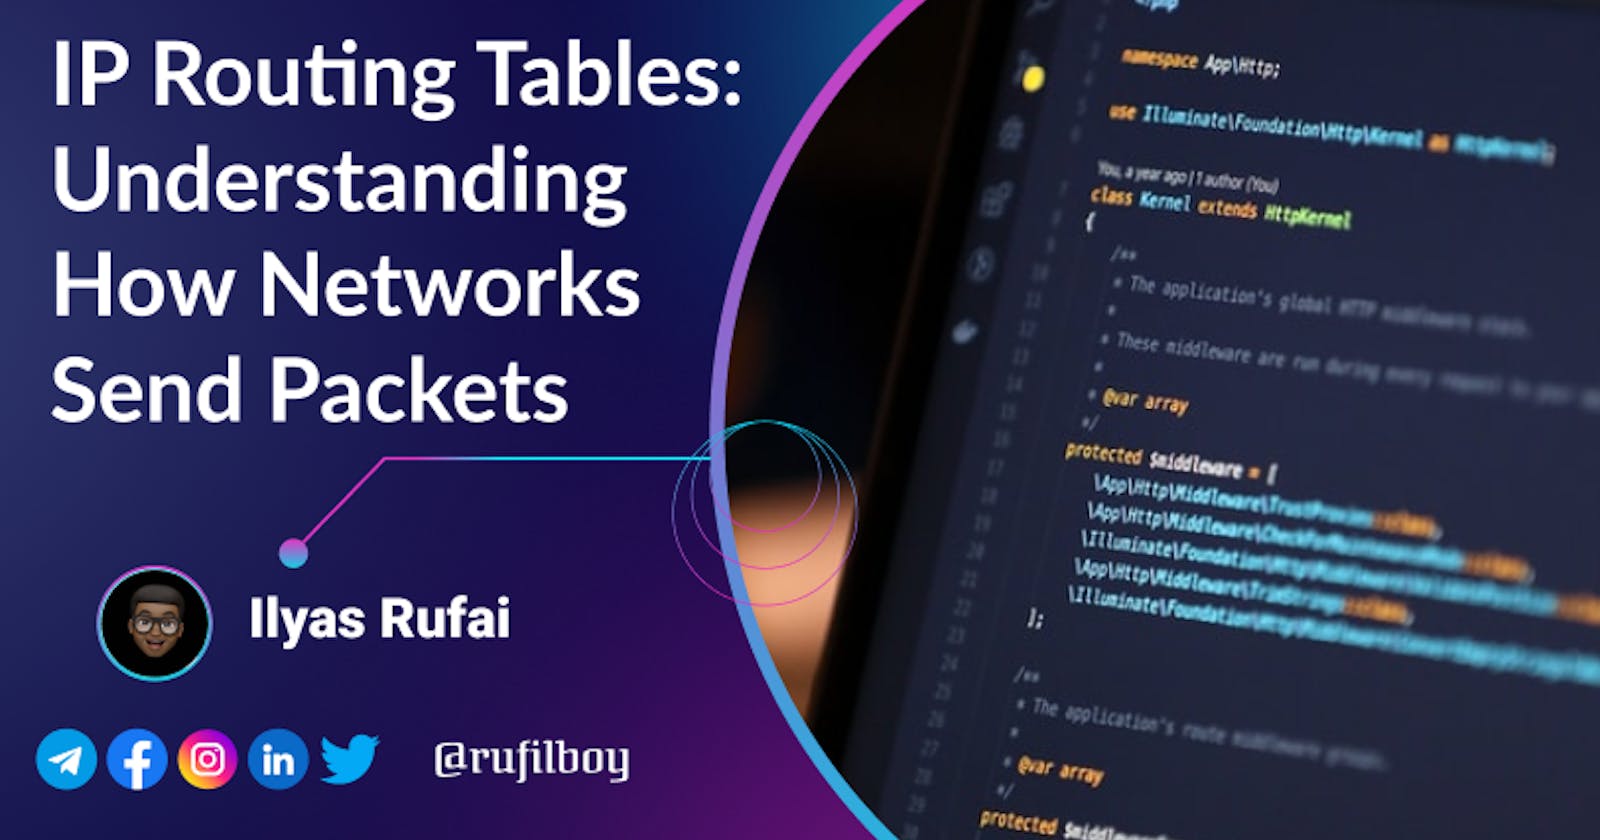 IP Routing Tables: Understanding How Networks Send Packets